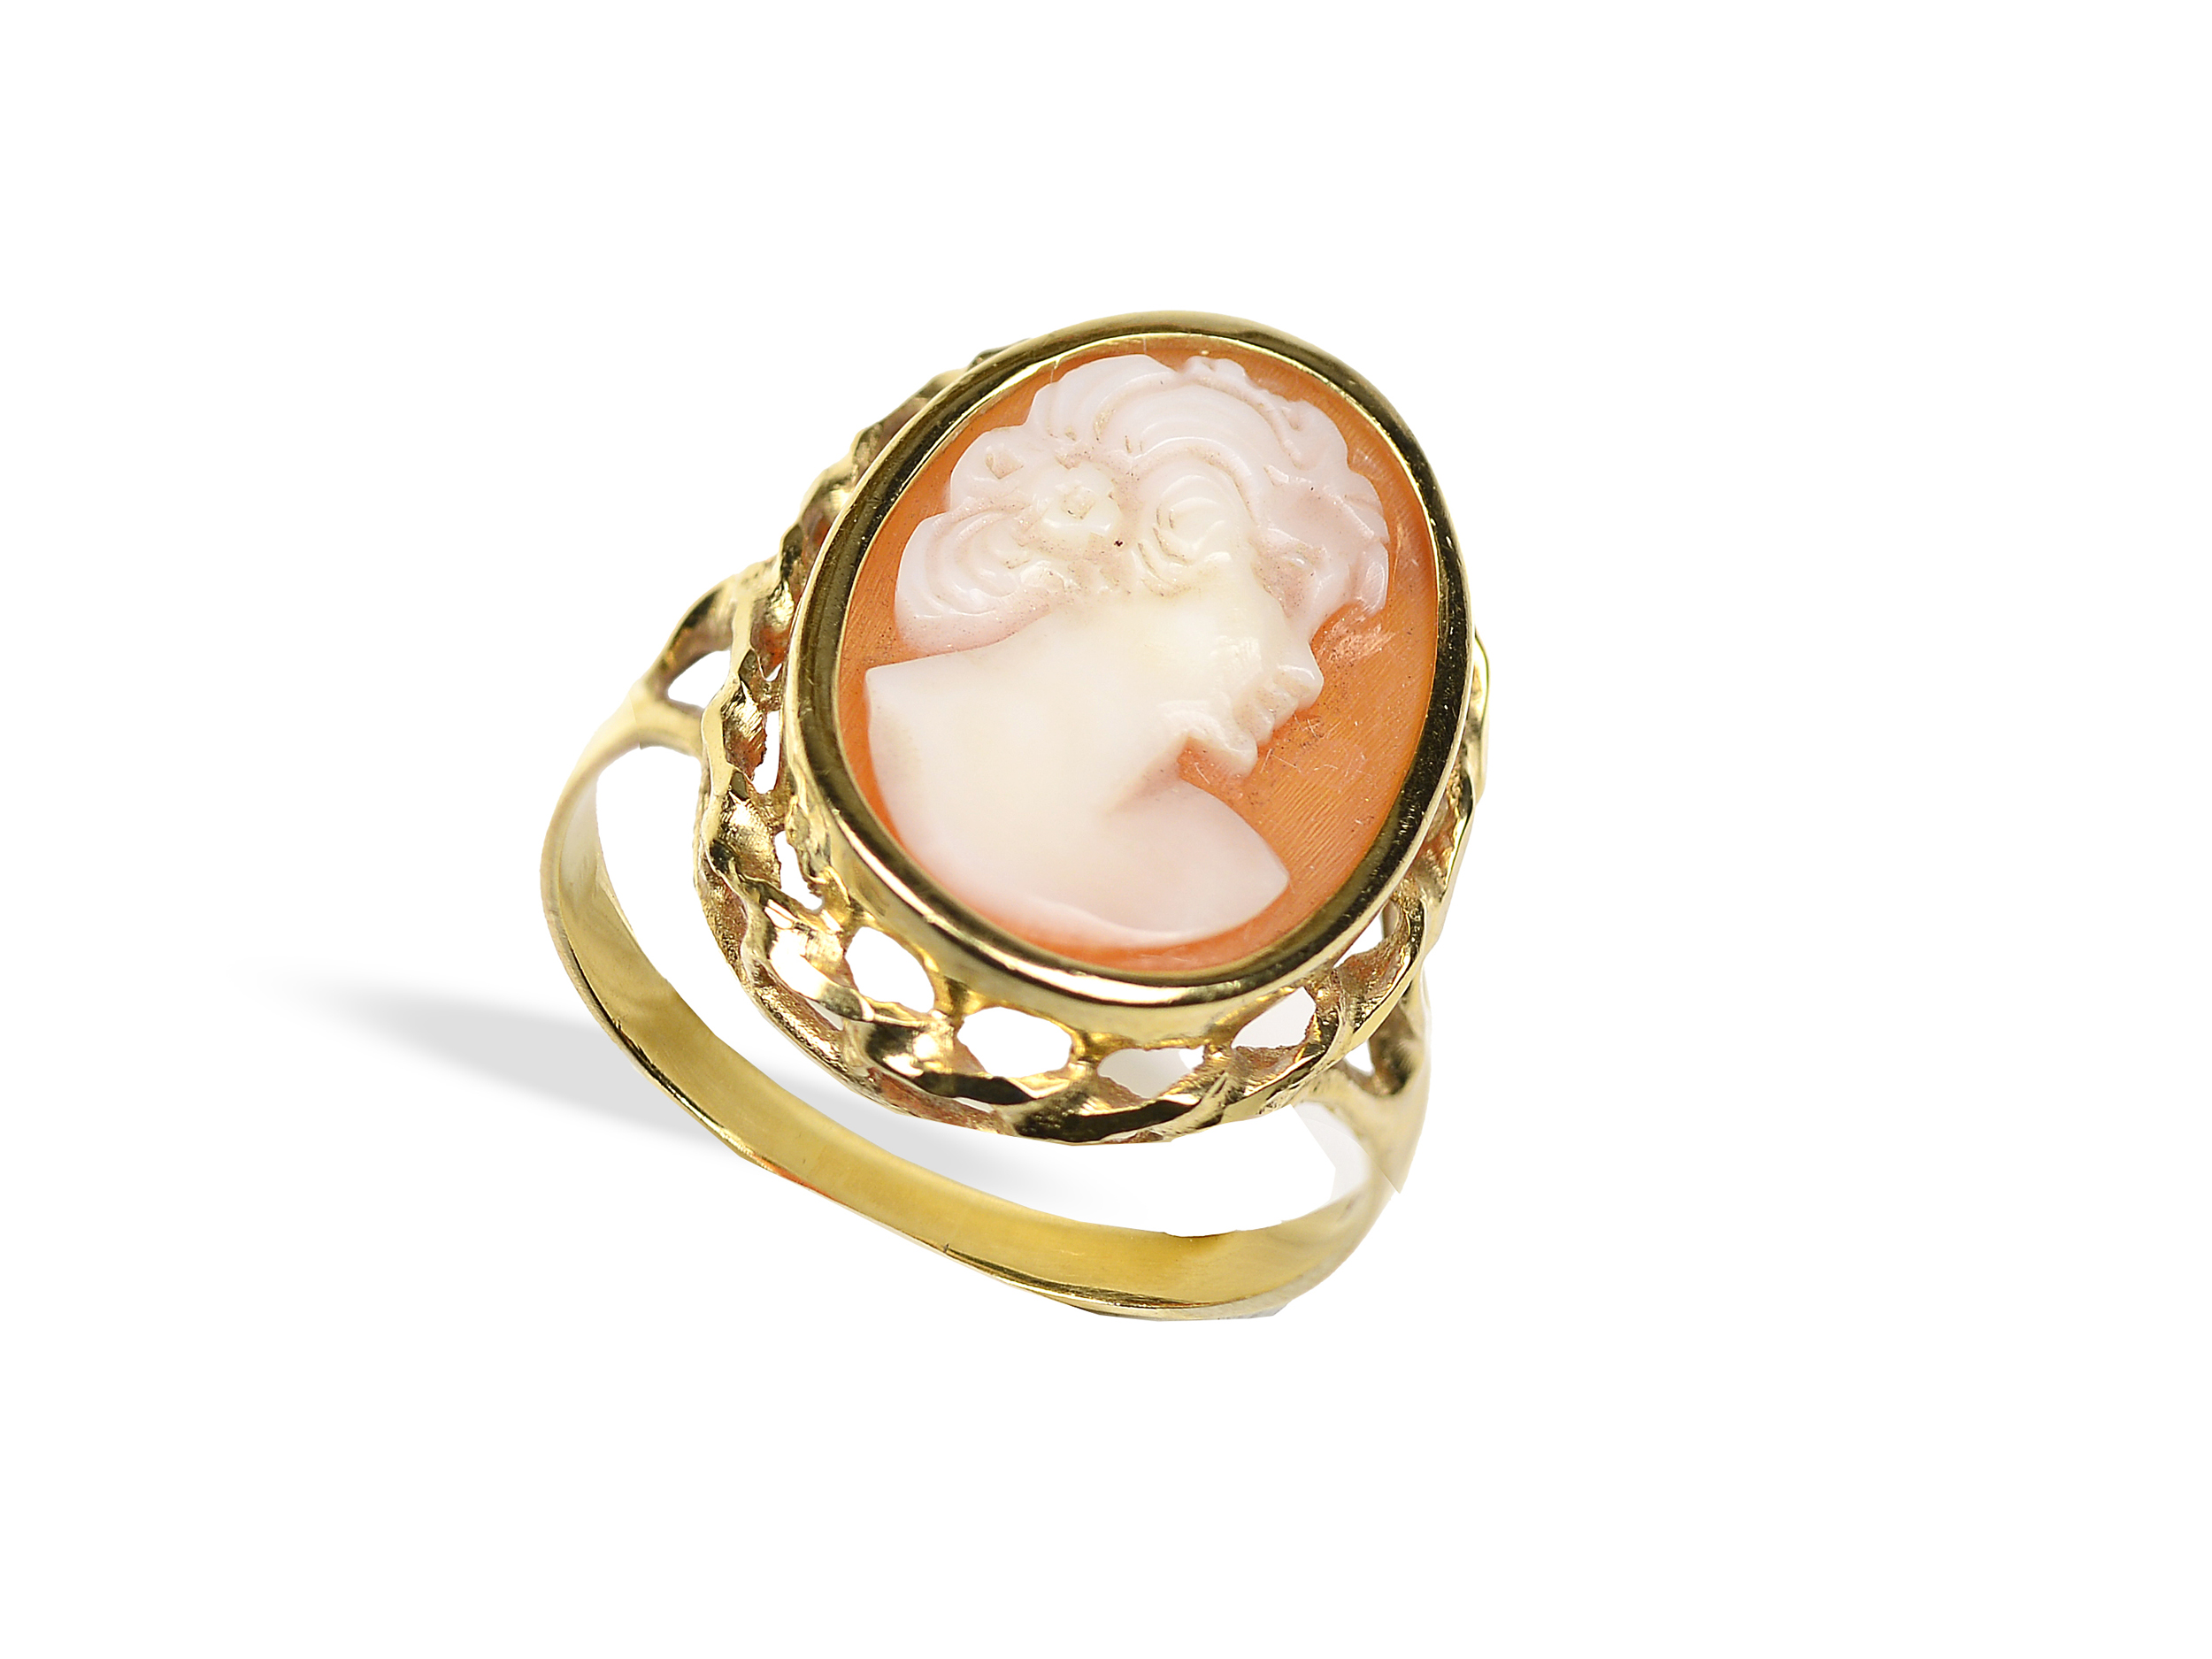 Set: Pair of earrings & ring with shell cameo - Image 2 of 3